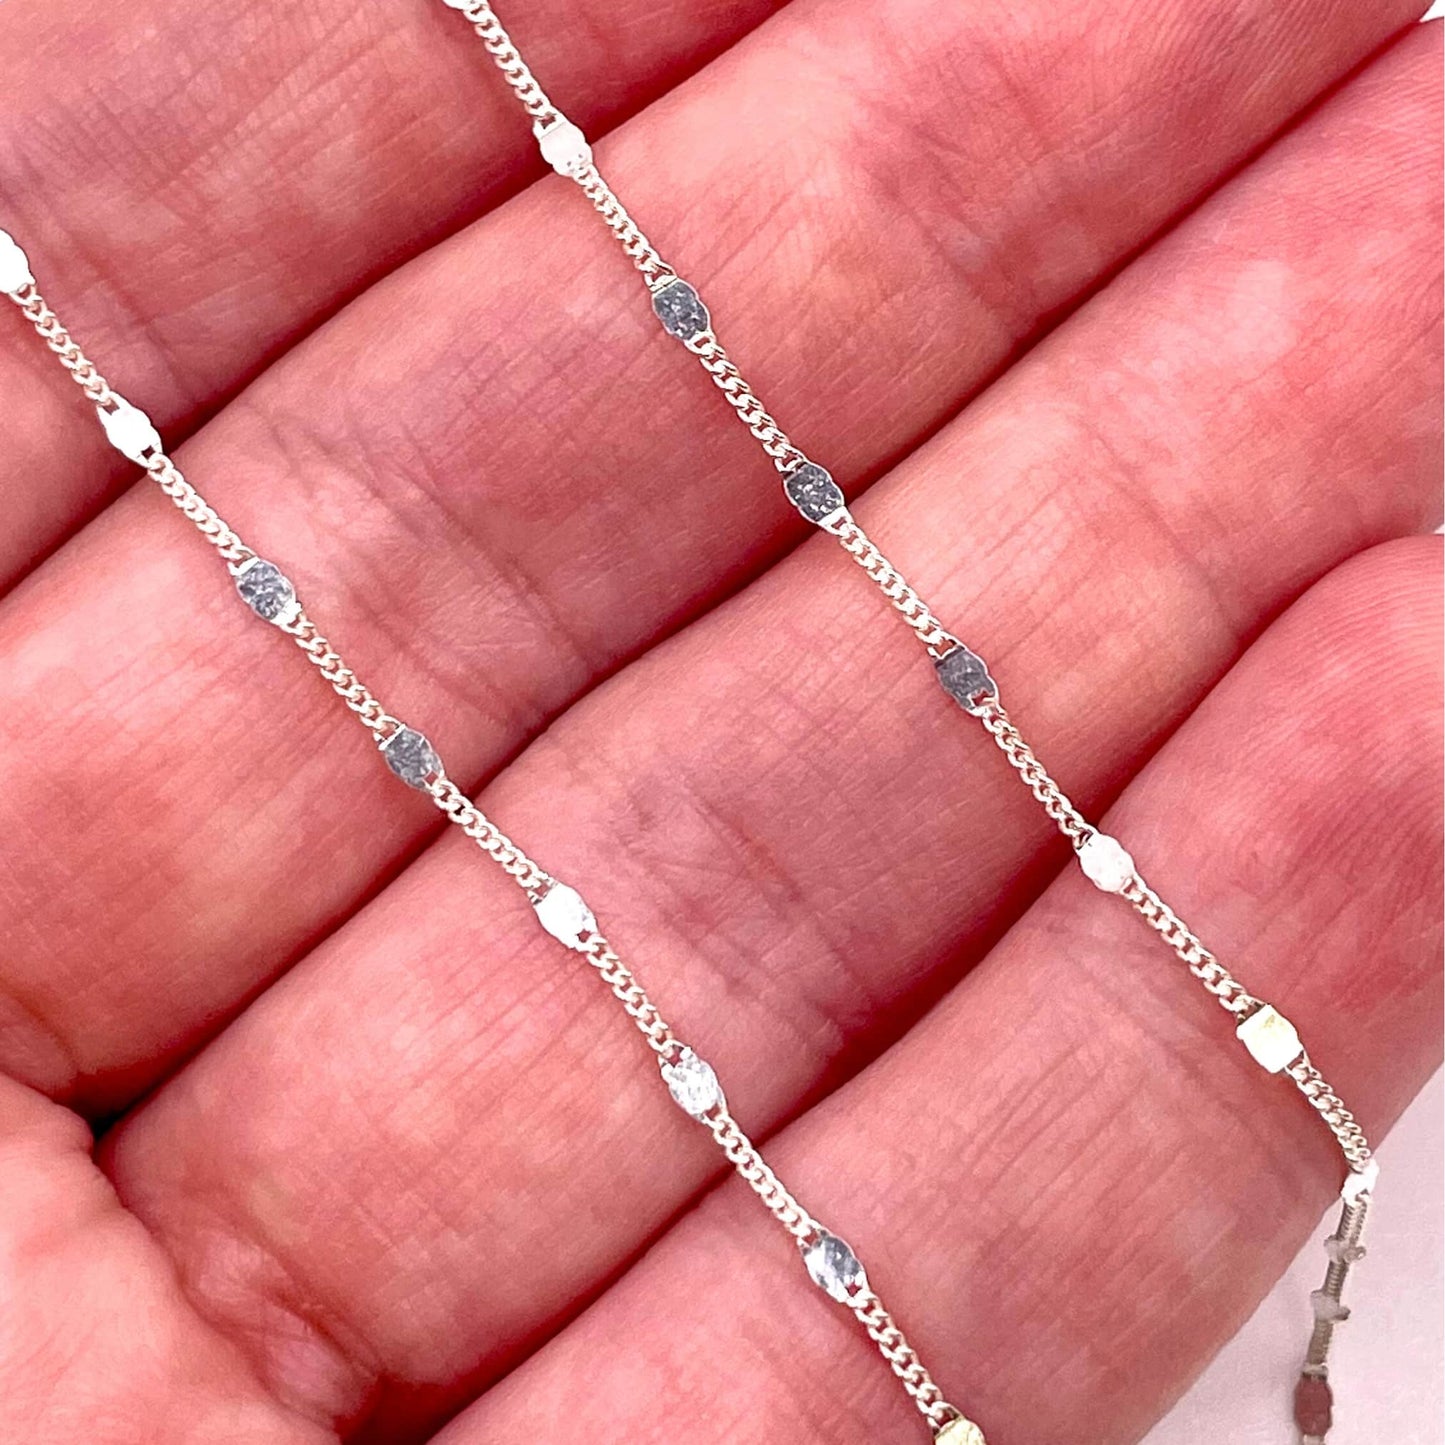 Actual photo of 925 sterling silver spacer chain for permanent jewelry.